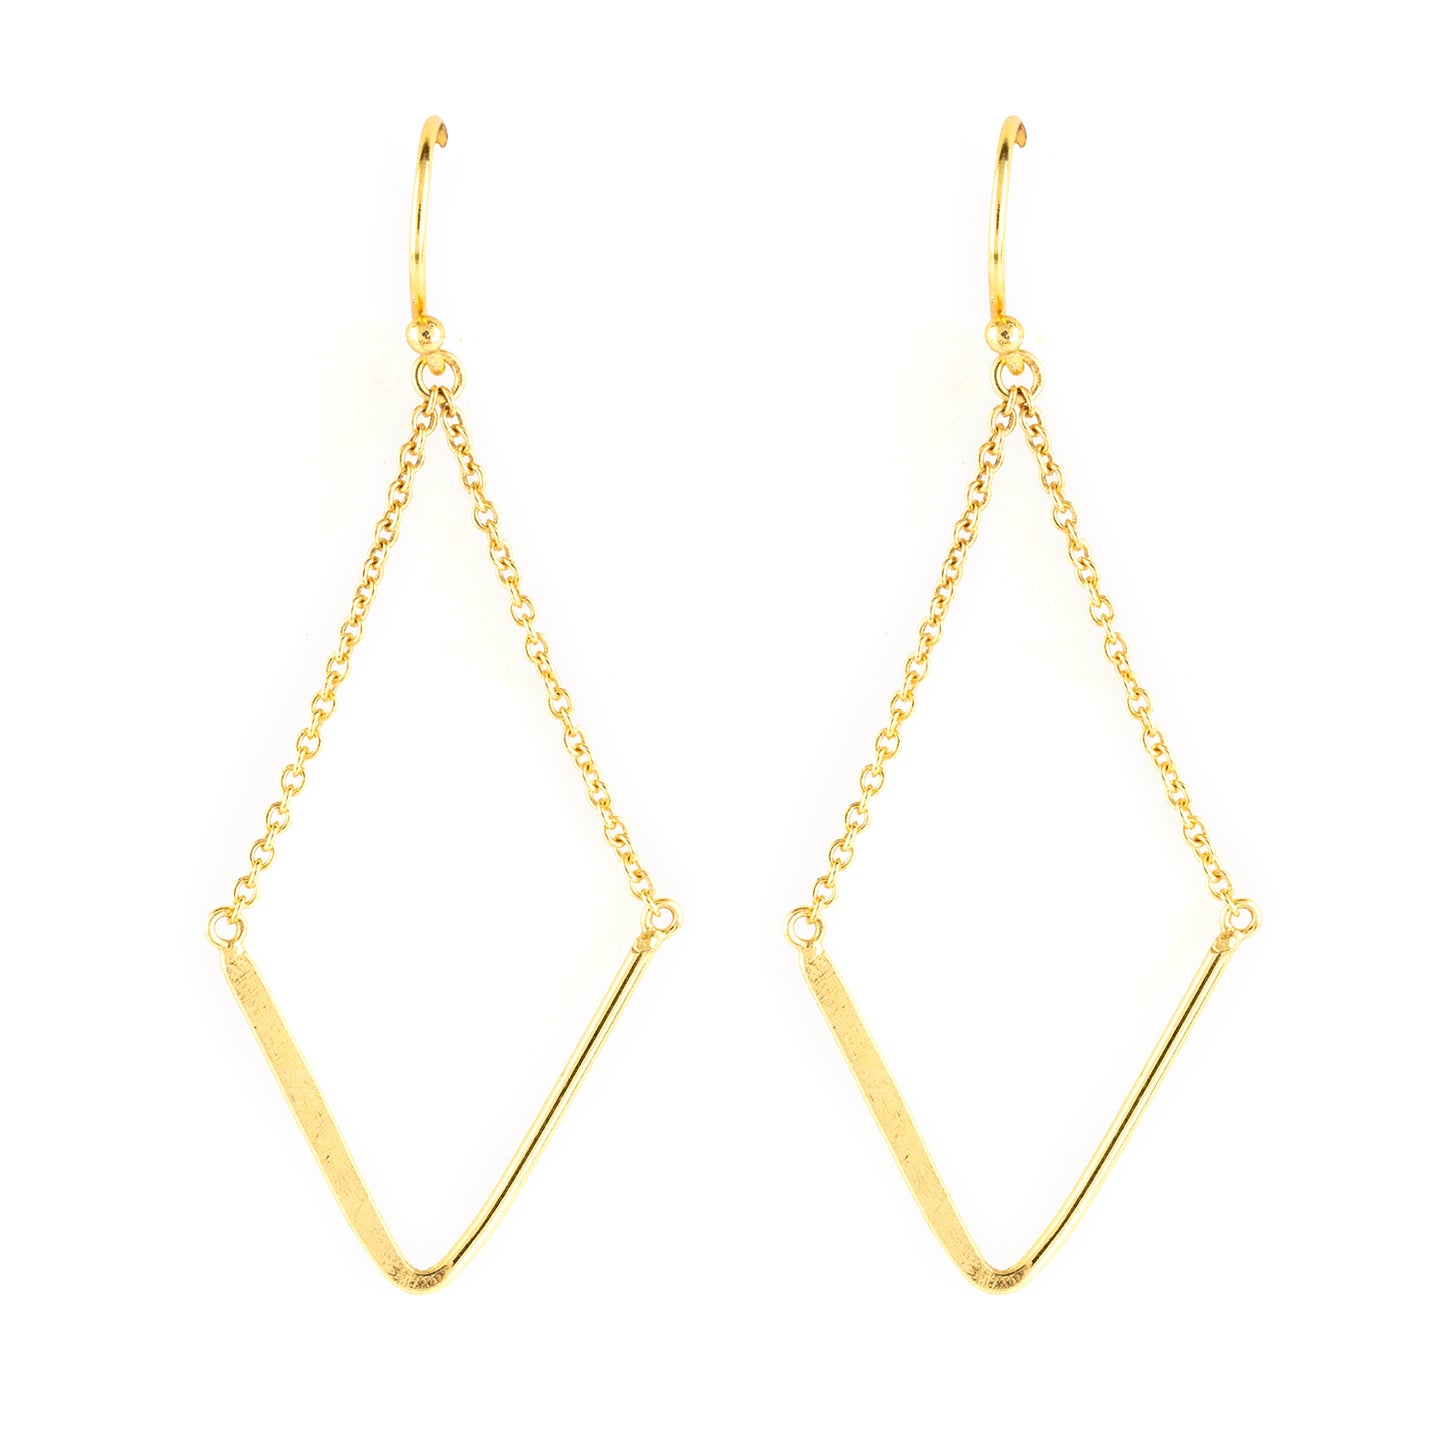 Gold Plated Everyday Chain Hanger Earrings